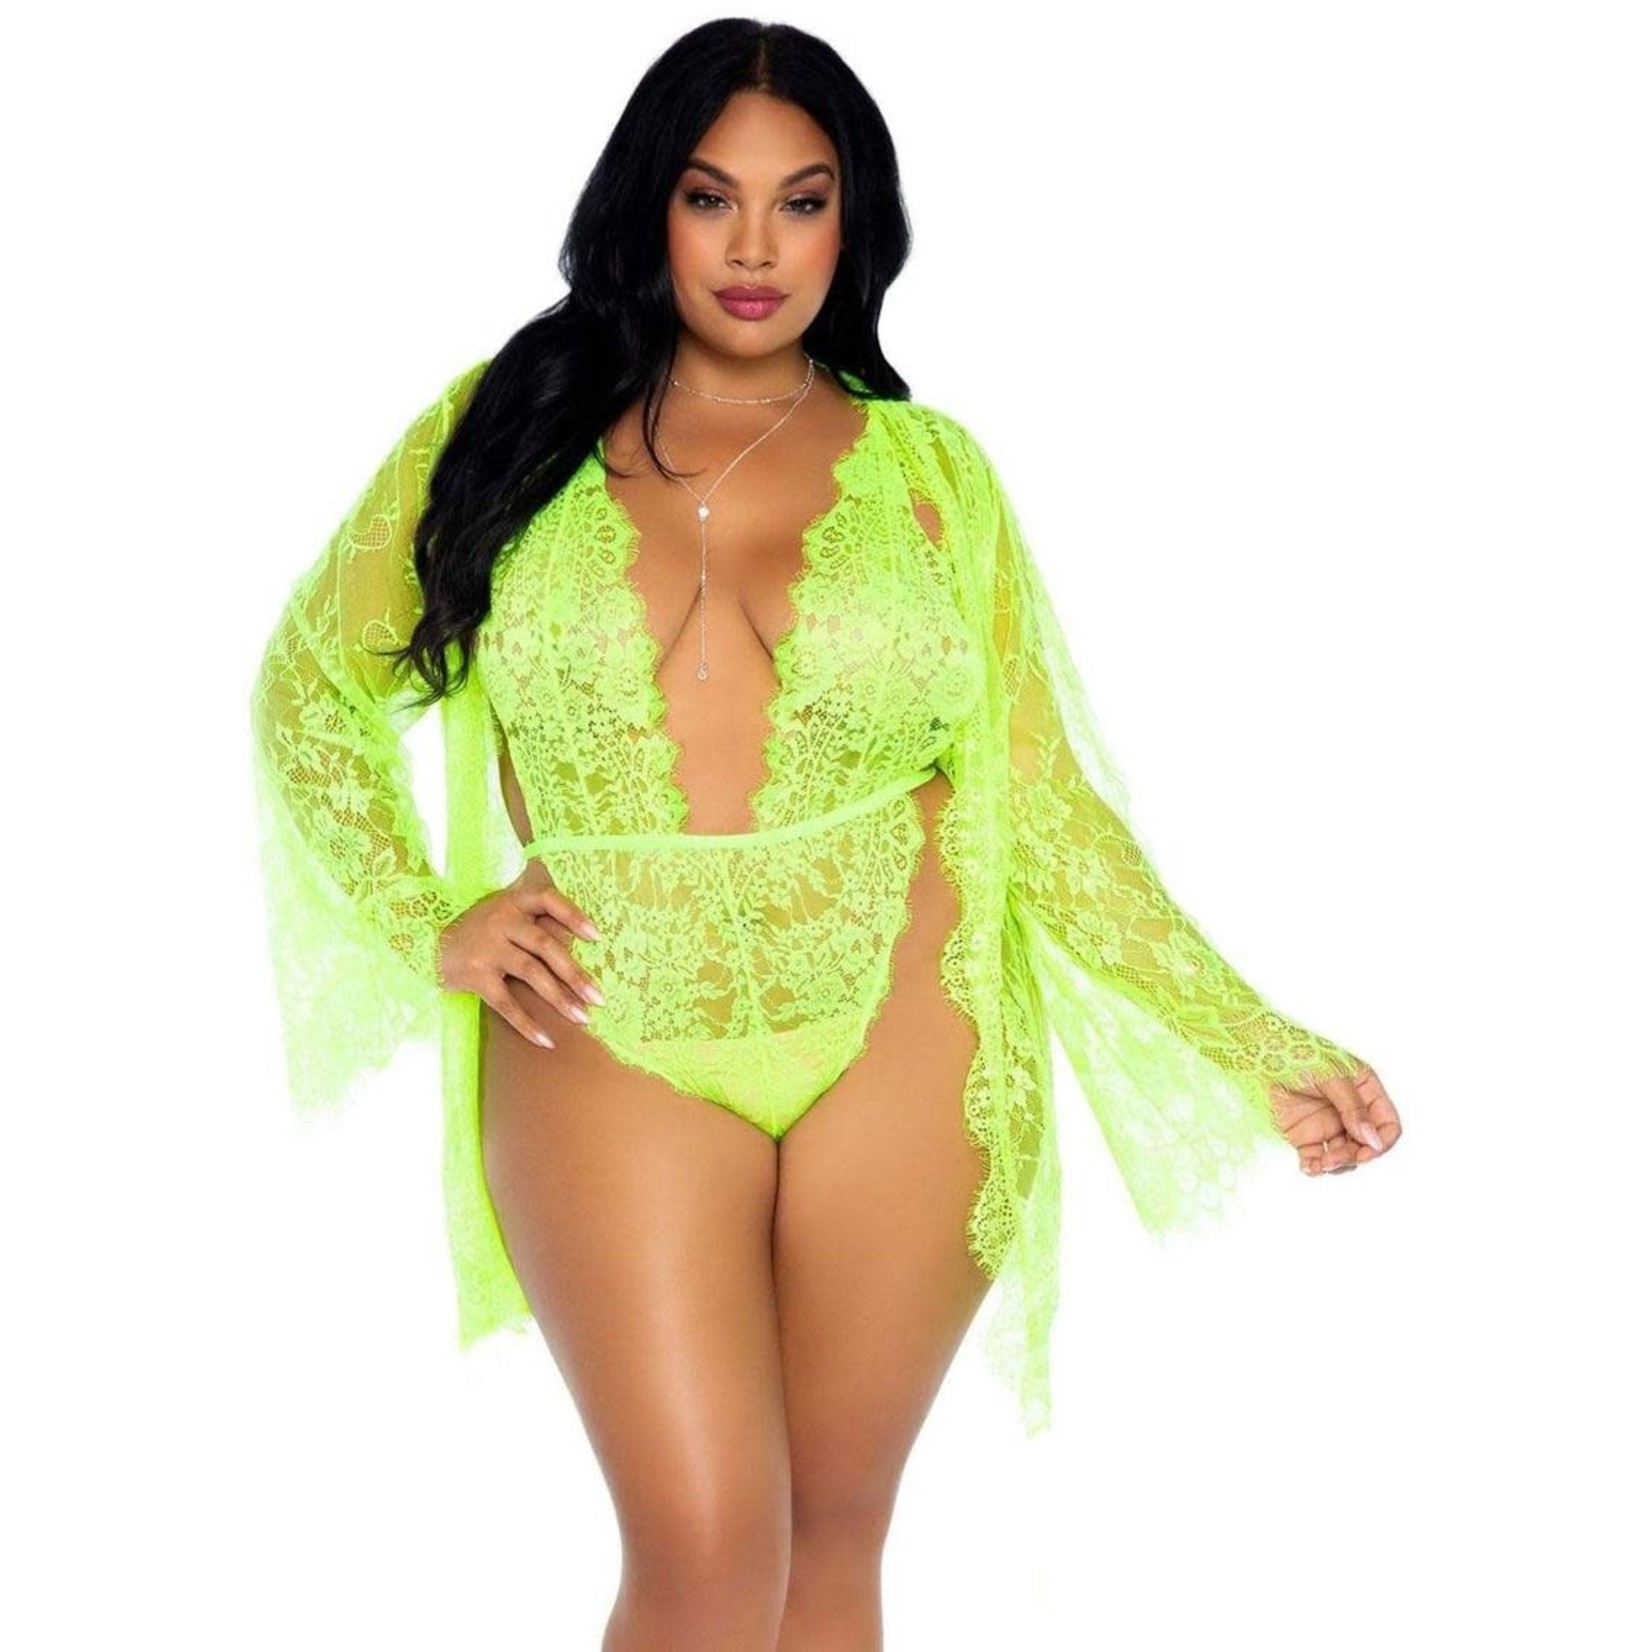 Leg Avenue Floral Lace Teddy With Adjustable Straps And Cheeky Thong Back, Matching Lace Robe With Scalloped Trim And Satin Tie (3 Piece) - 1X-2X - Lime